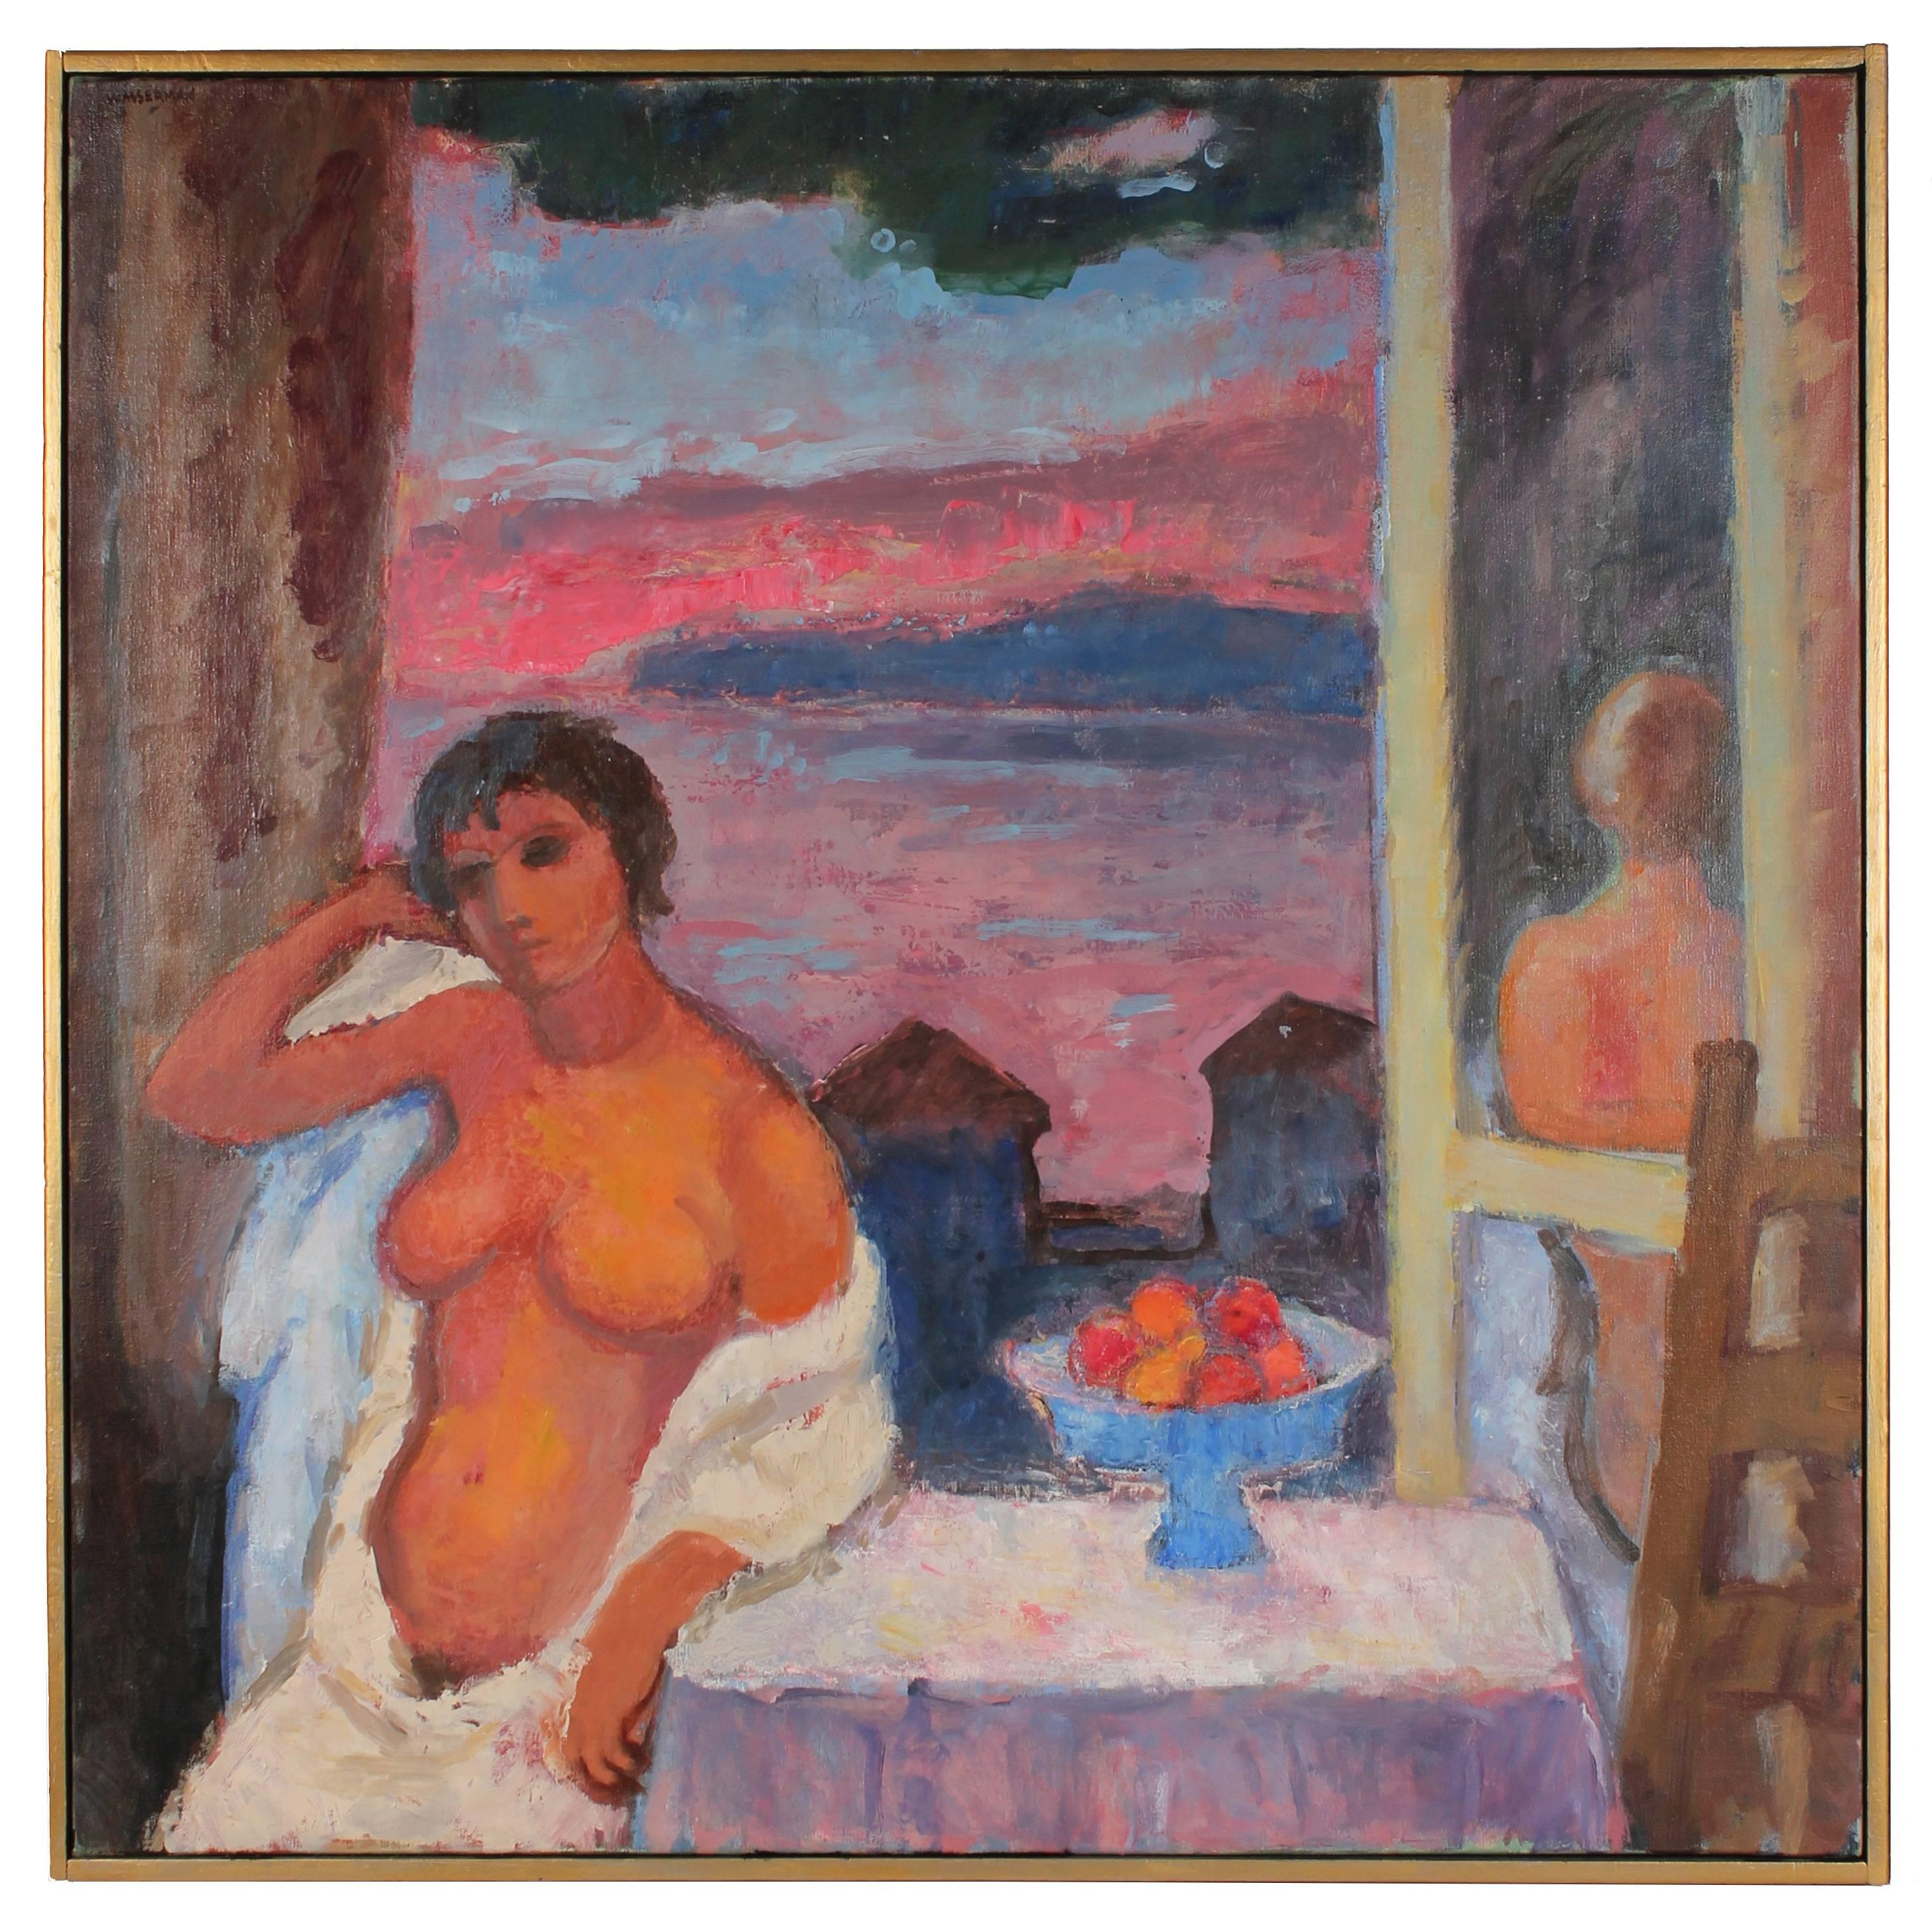 Gerald Wasserman Interior Painting - "Cannery Row Nude" Sunset Landscape Oil Painting, 20th Century